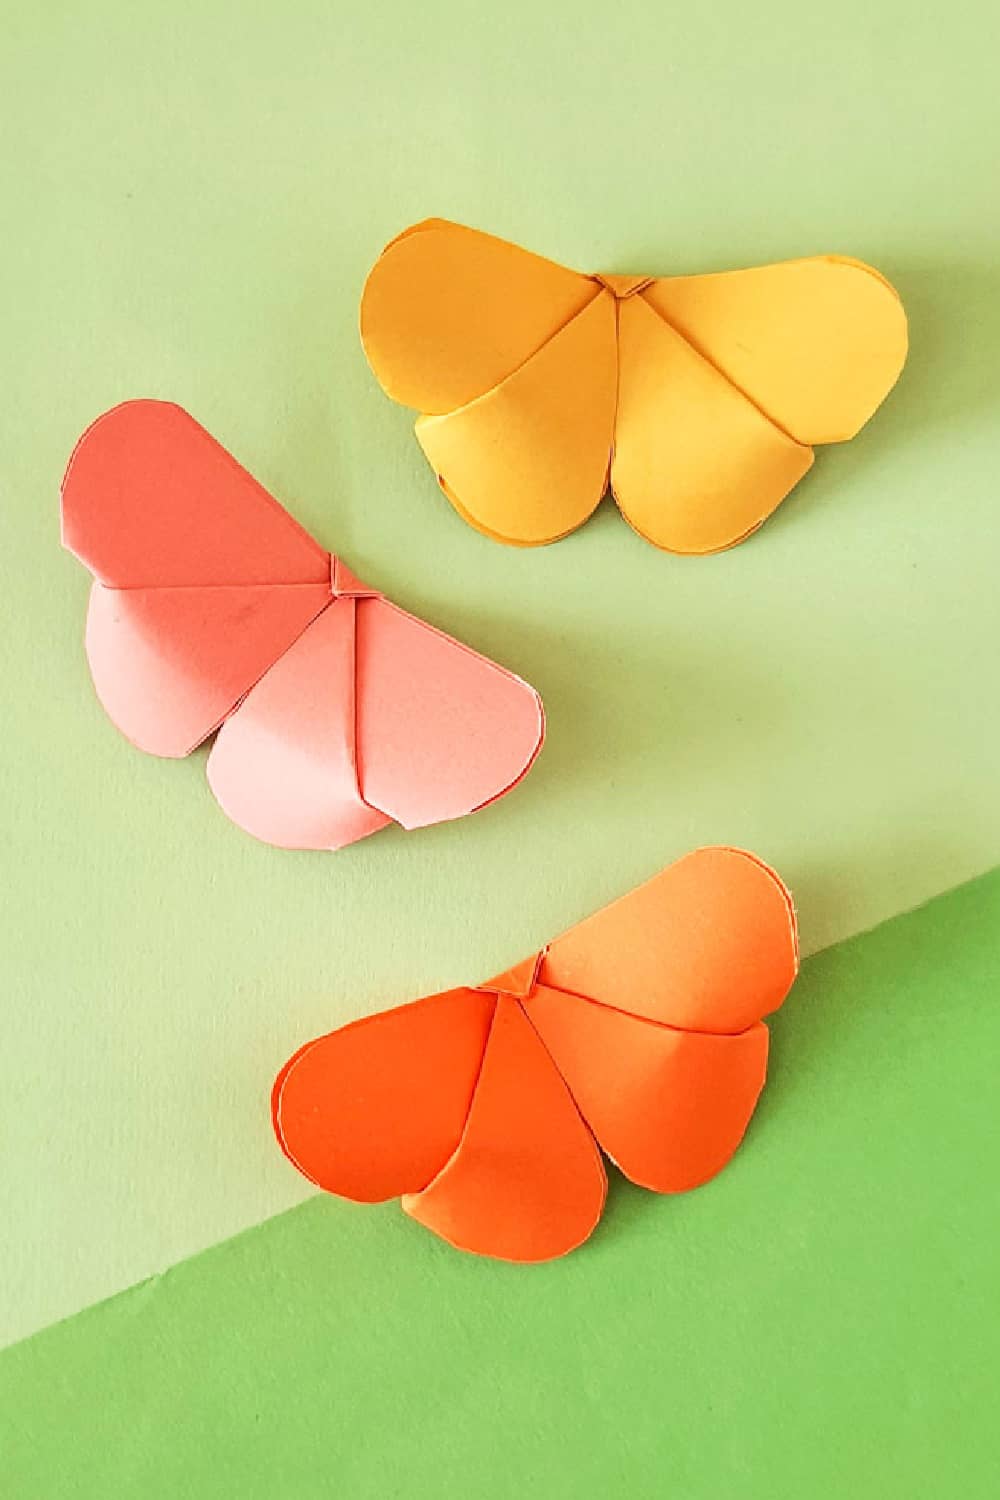 butterfly origami